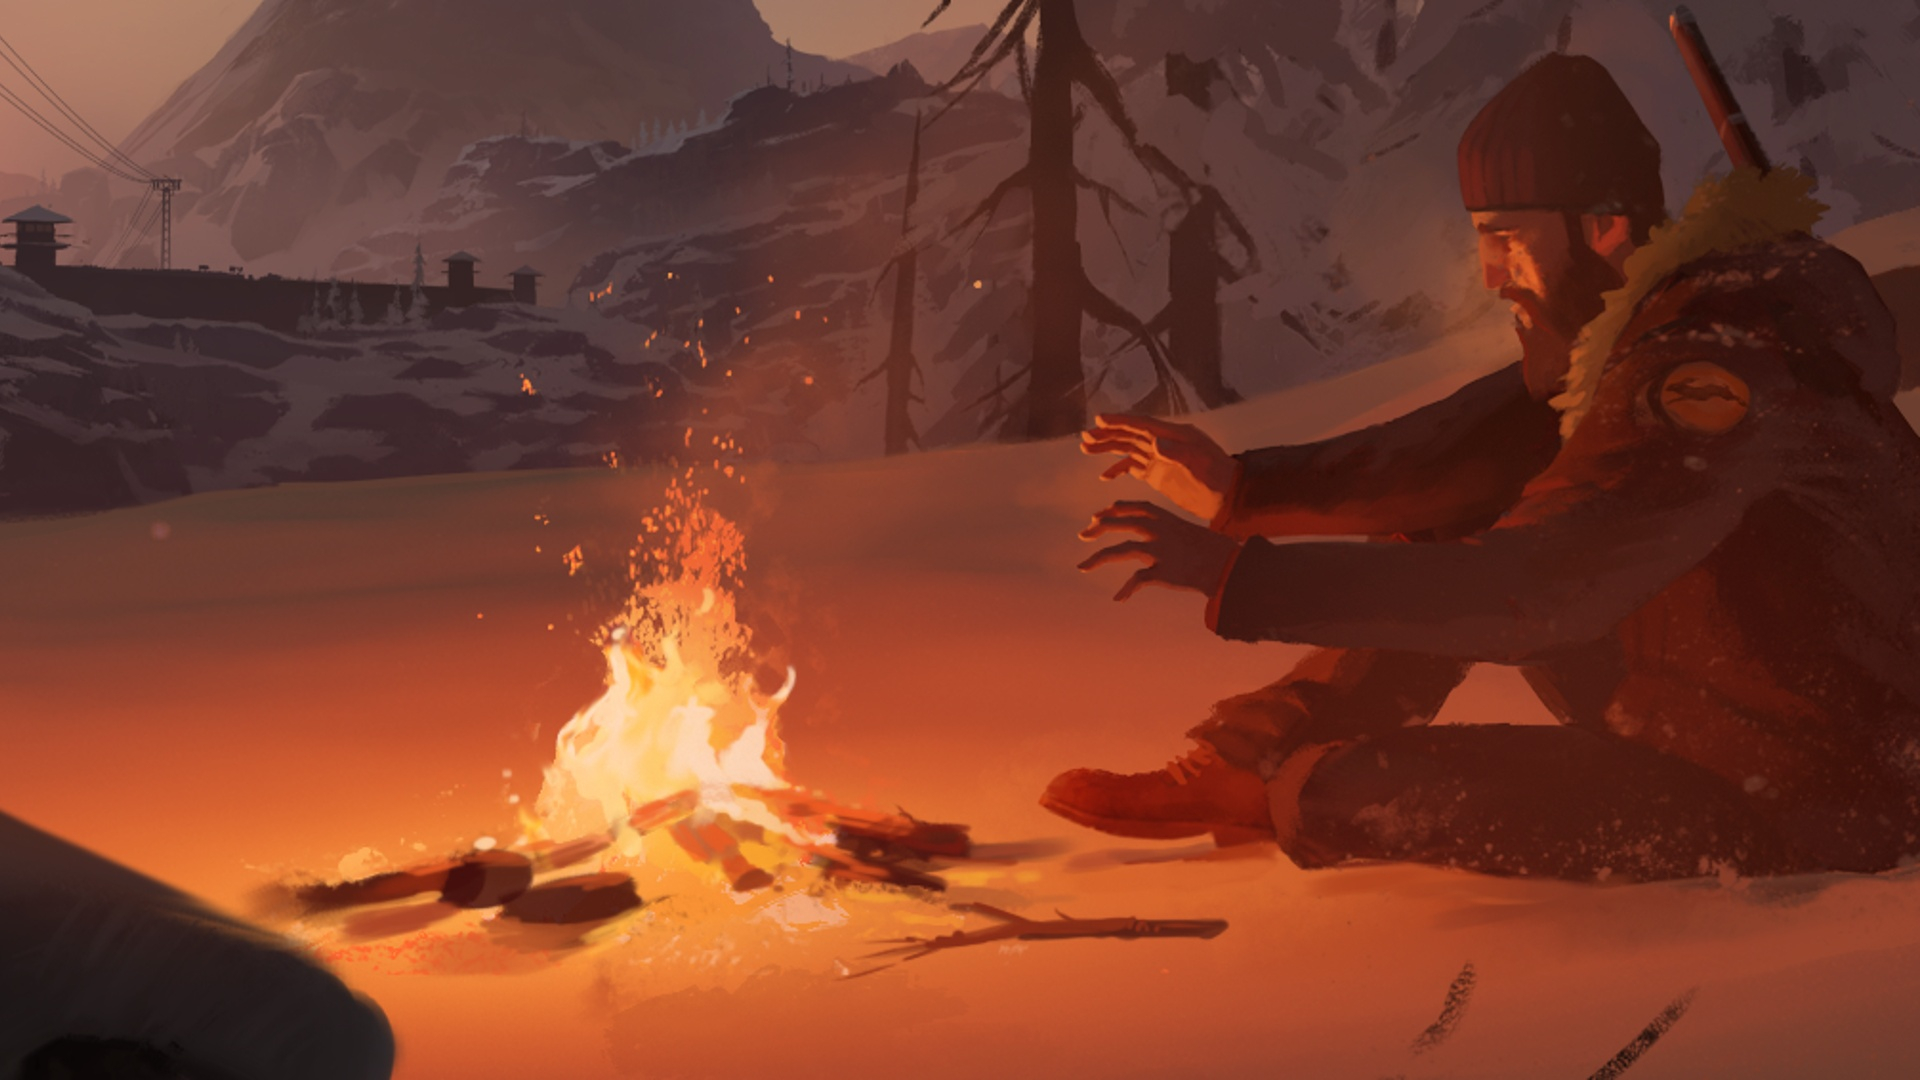 1920x1080 The Long Dark gets its first paid updates for Survival mode later this year | Rock Paper Shotgu